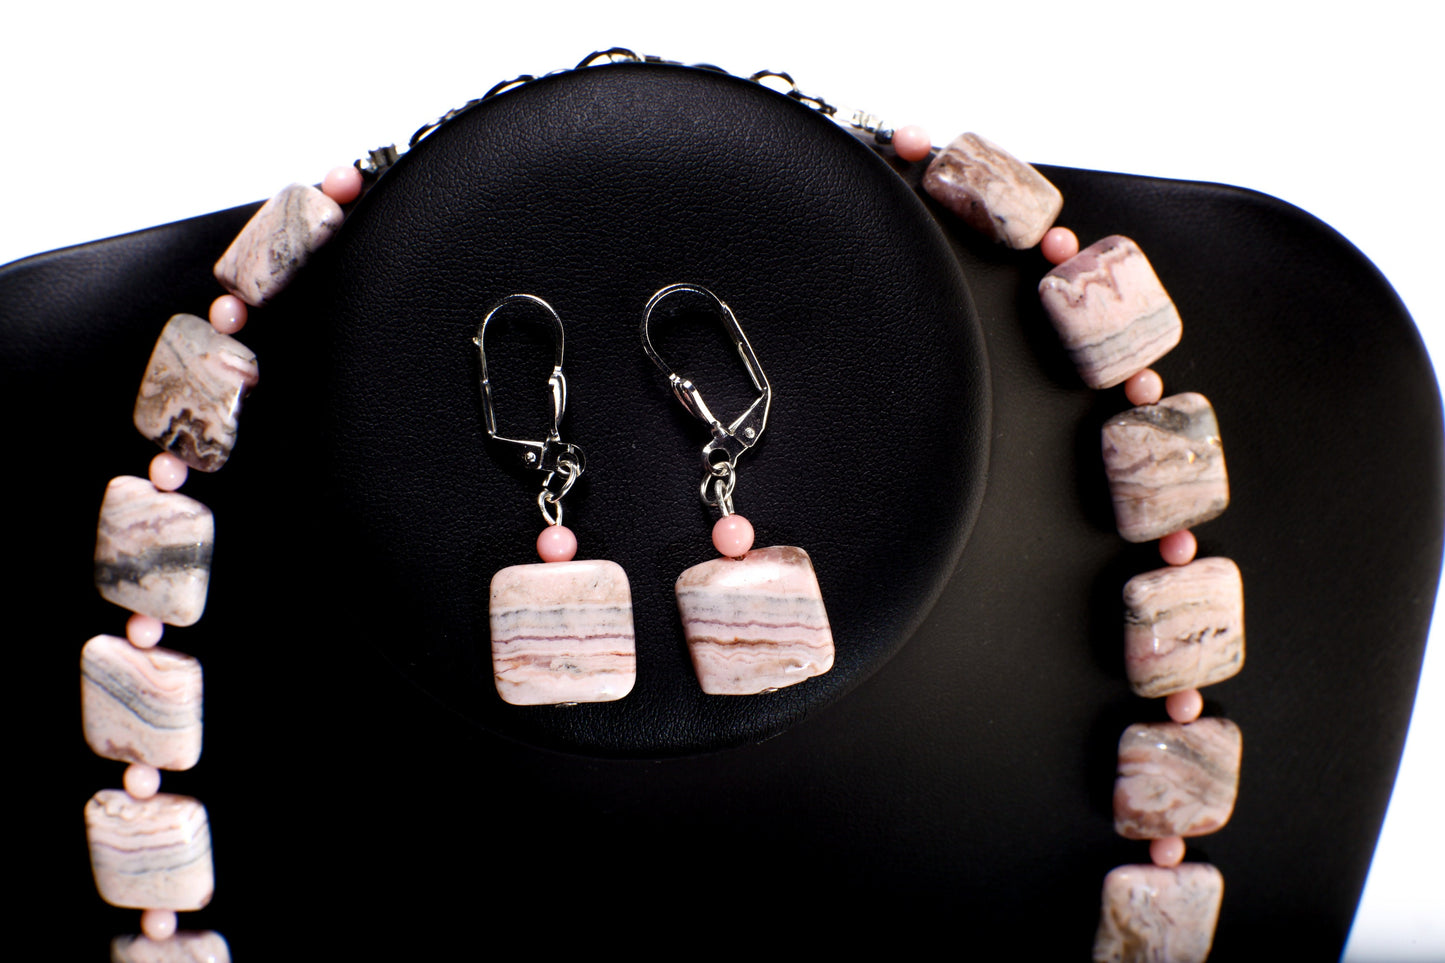 Argentina Rhodochrosite Square Pillow Shape Necklace, Earrings Set, Freshwater Coin Pearl accents with Moonstone, Coral & Carnelian Clusters